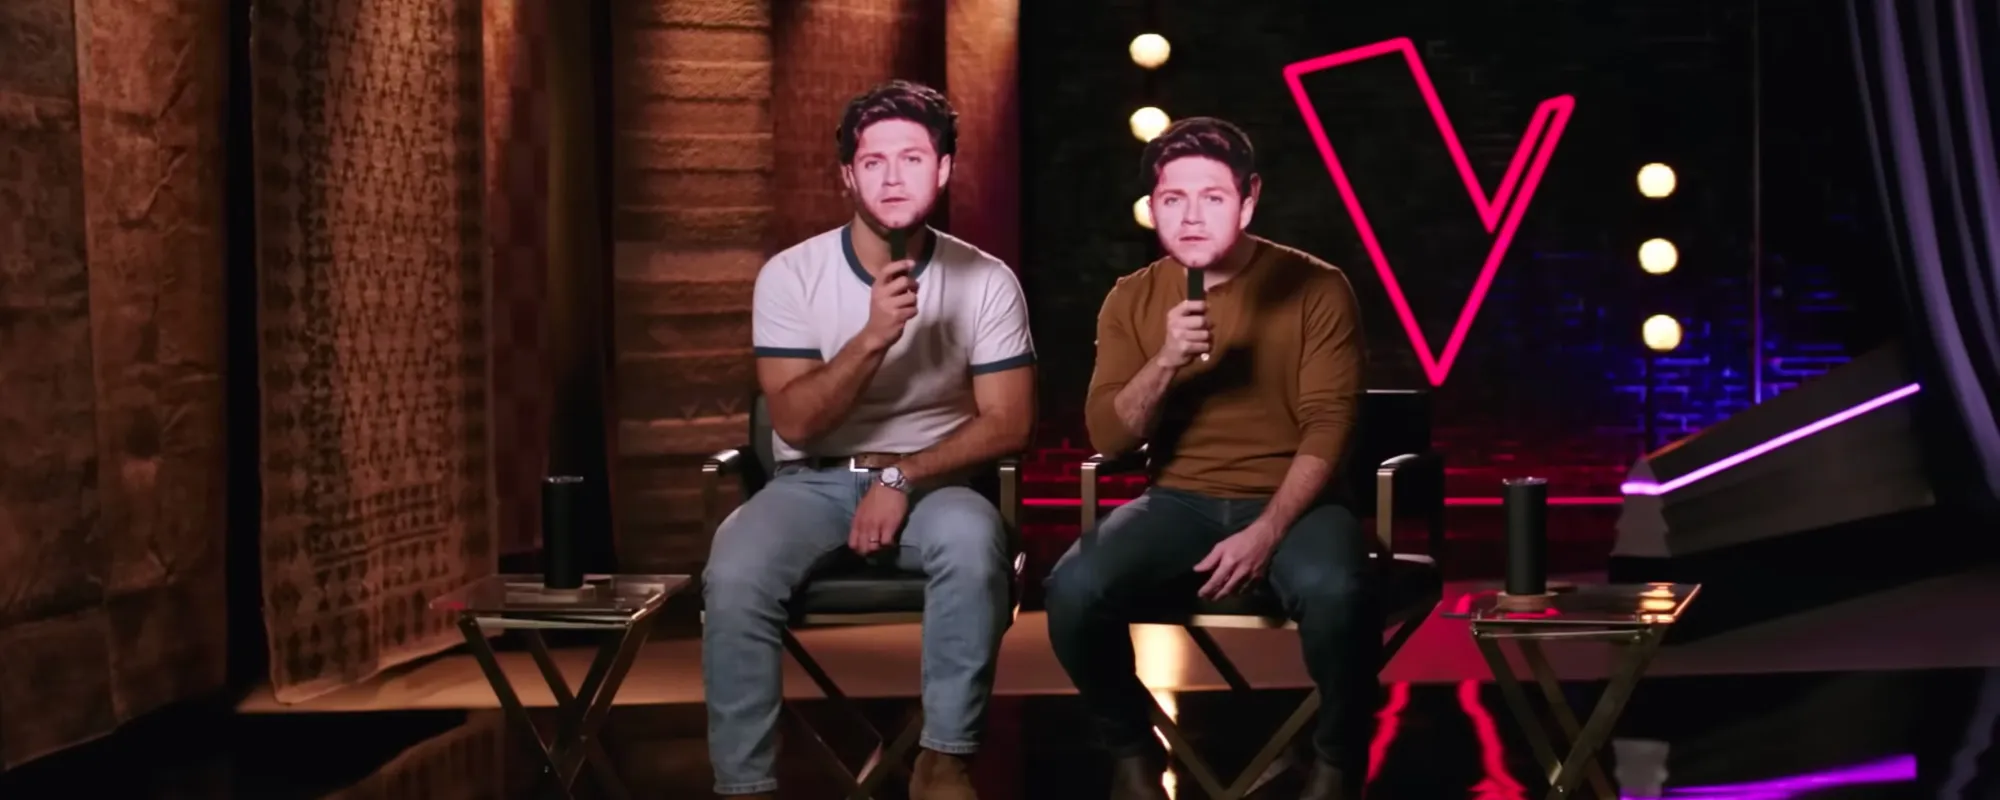 Watch: Niall Horan Surprises Team with Not One, but Two Guest Coaches on ‘The Voice’